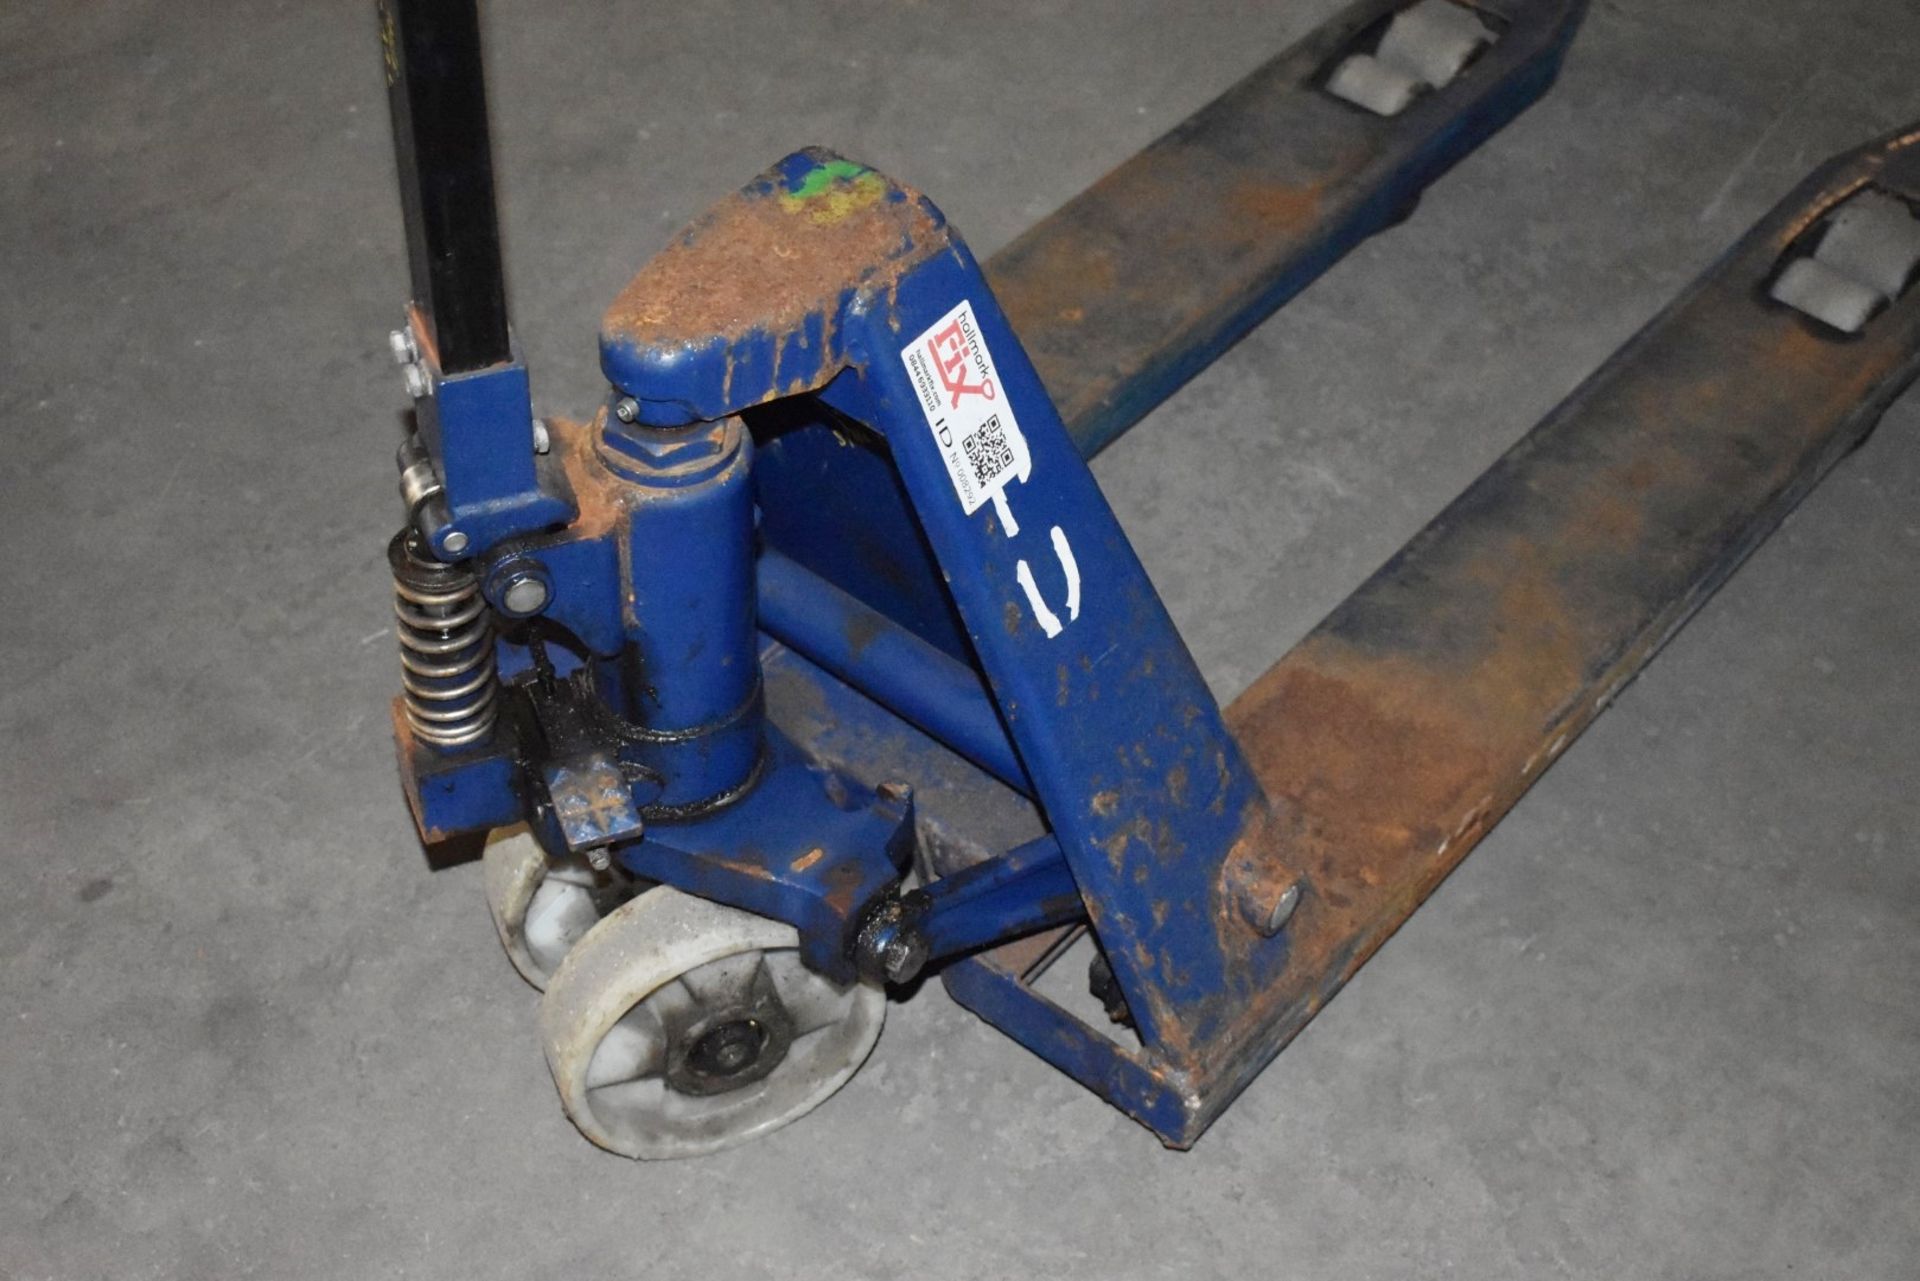 1 x Hand Pump Truck With 2000kg Capacity - Fork Length 100 x Width 55 cms - Ref VM156 - CL409 - - Image 4 of 6